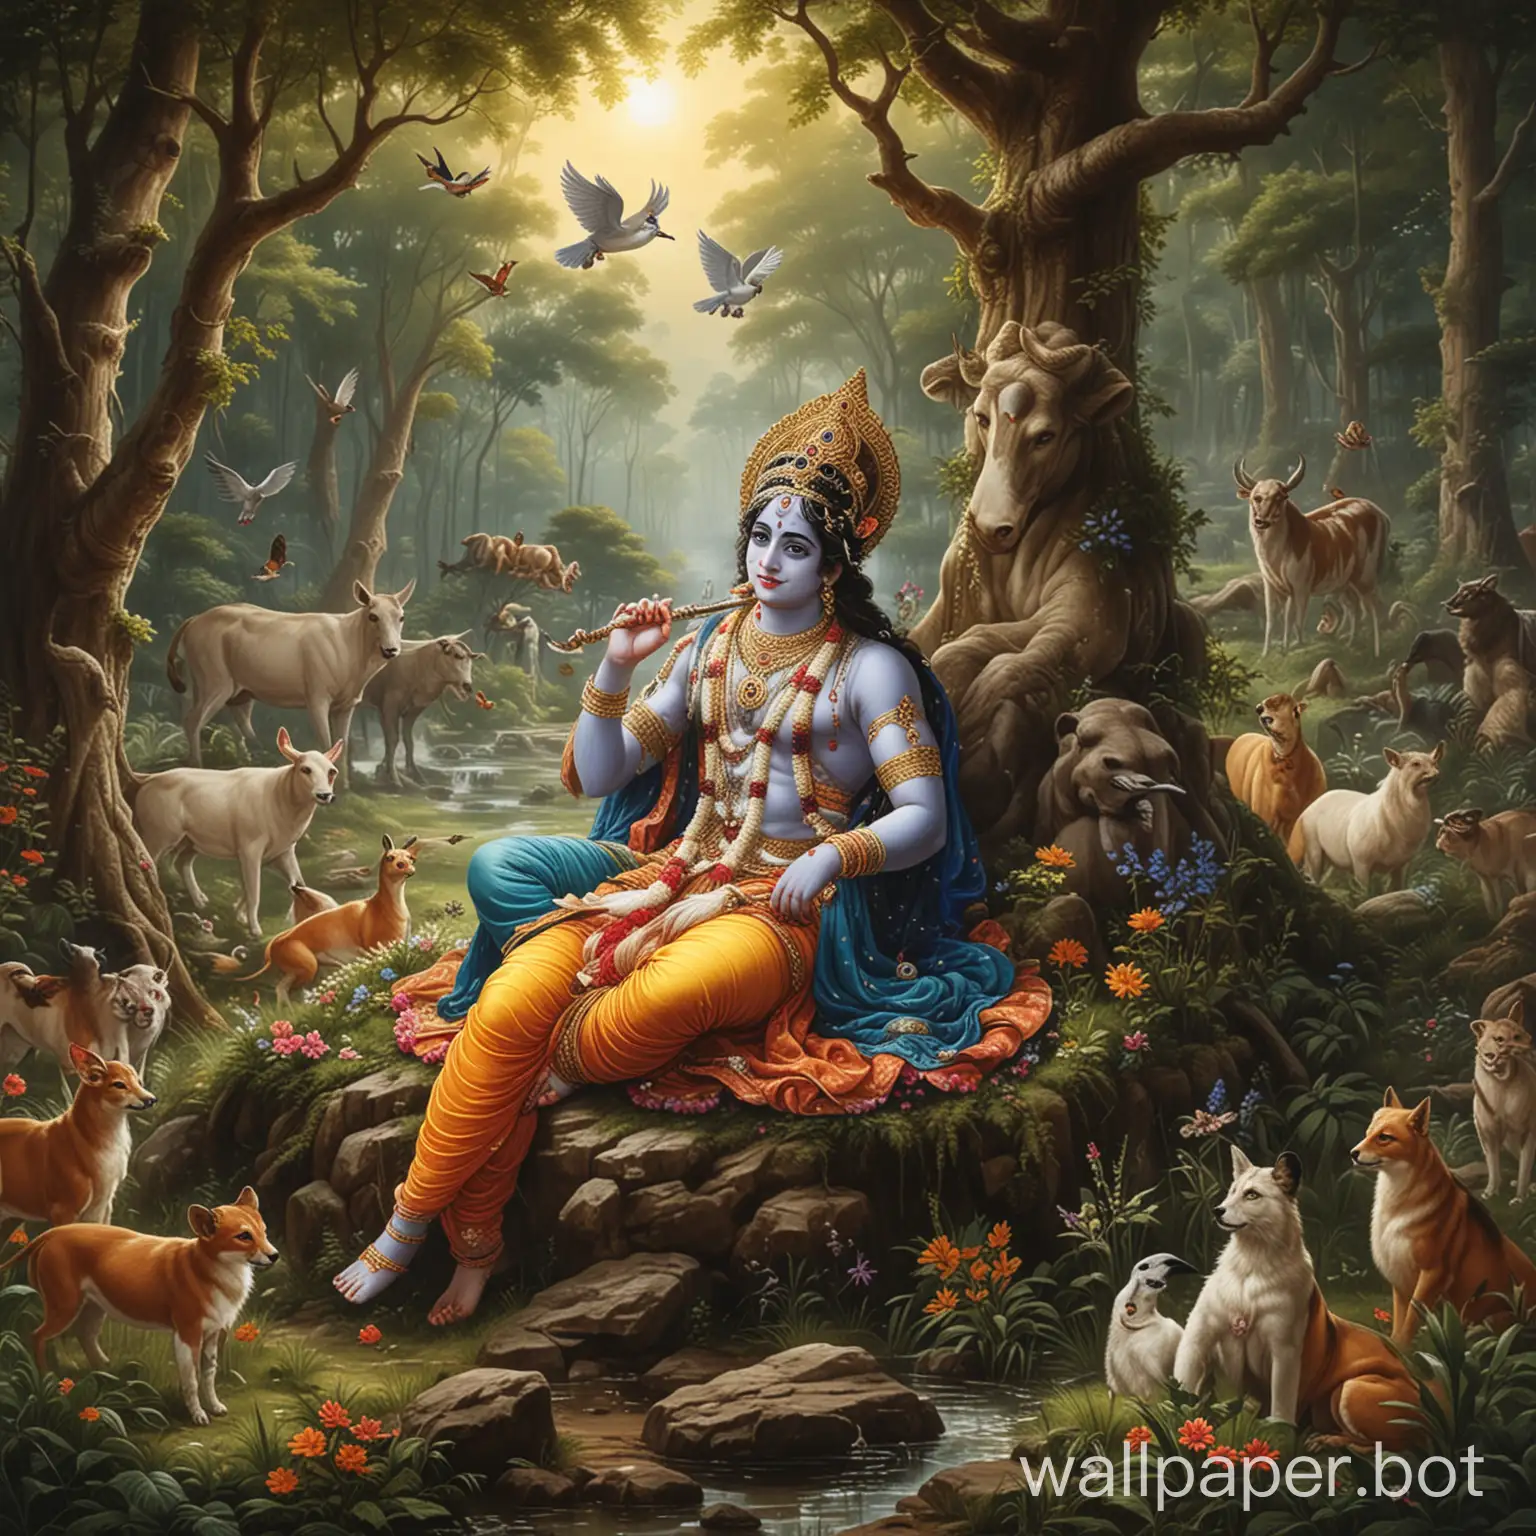 Divine-Encounter-Lord-Krishna-and-Radha-Amidst-Enchanted-Forest-Serenity